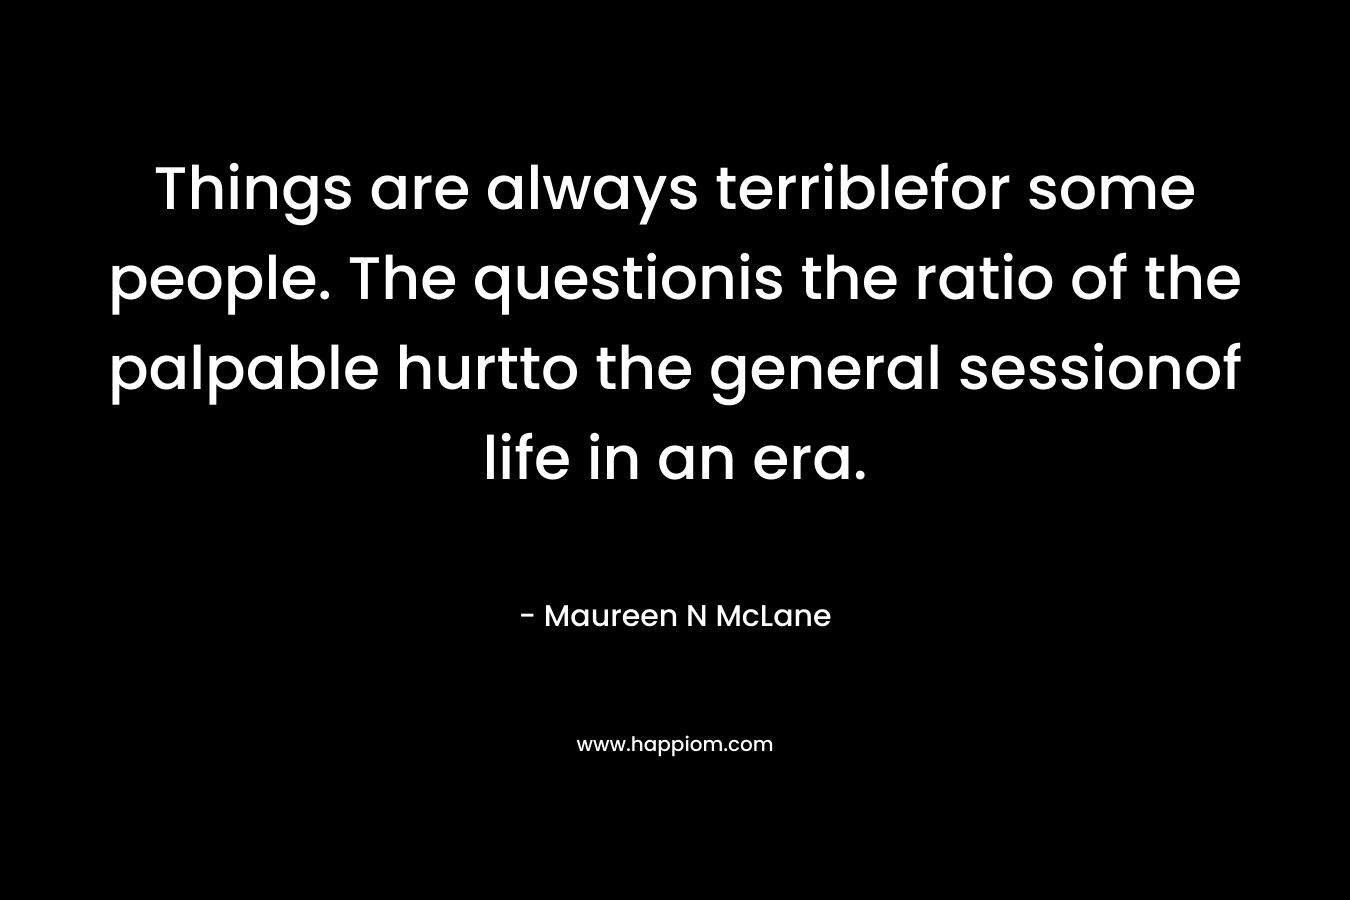 Things are always terriblefor some people. The questionis the ratio of the palpable hurtto the general sessionof life in an era. – Maureen N McLane